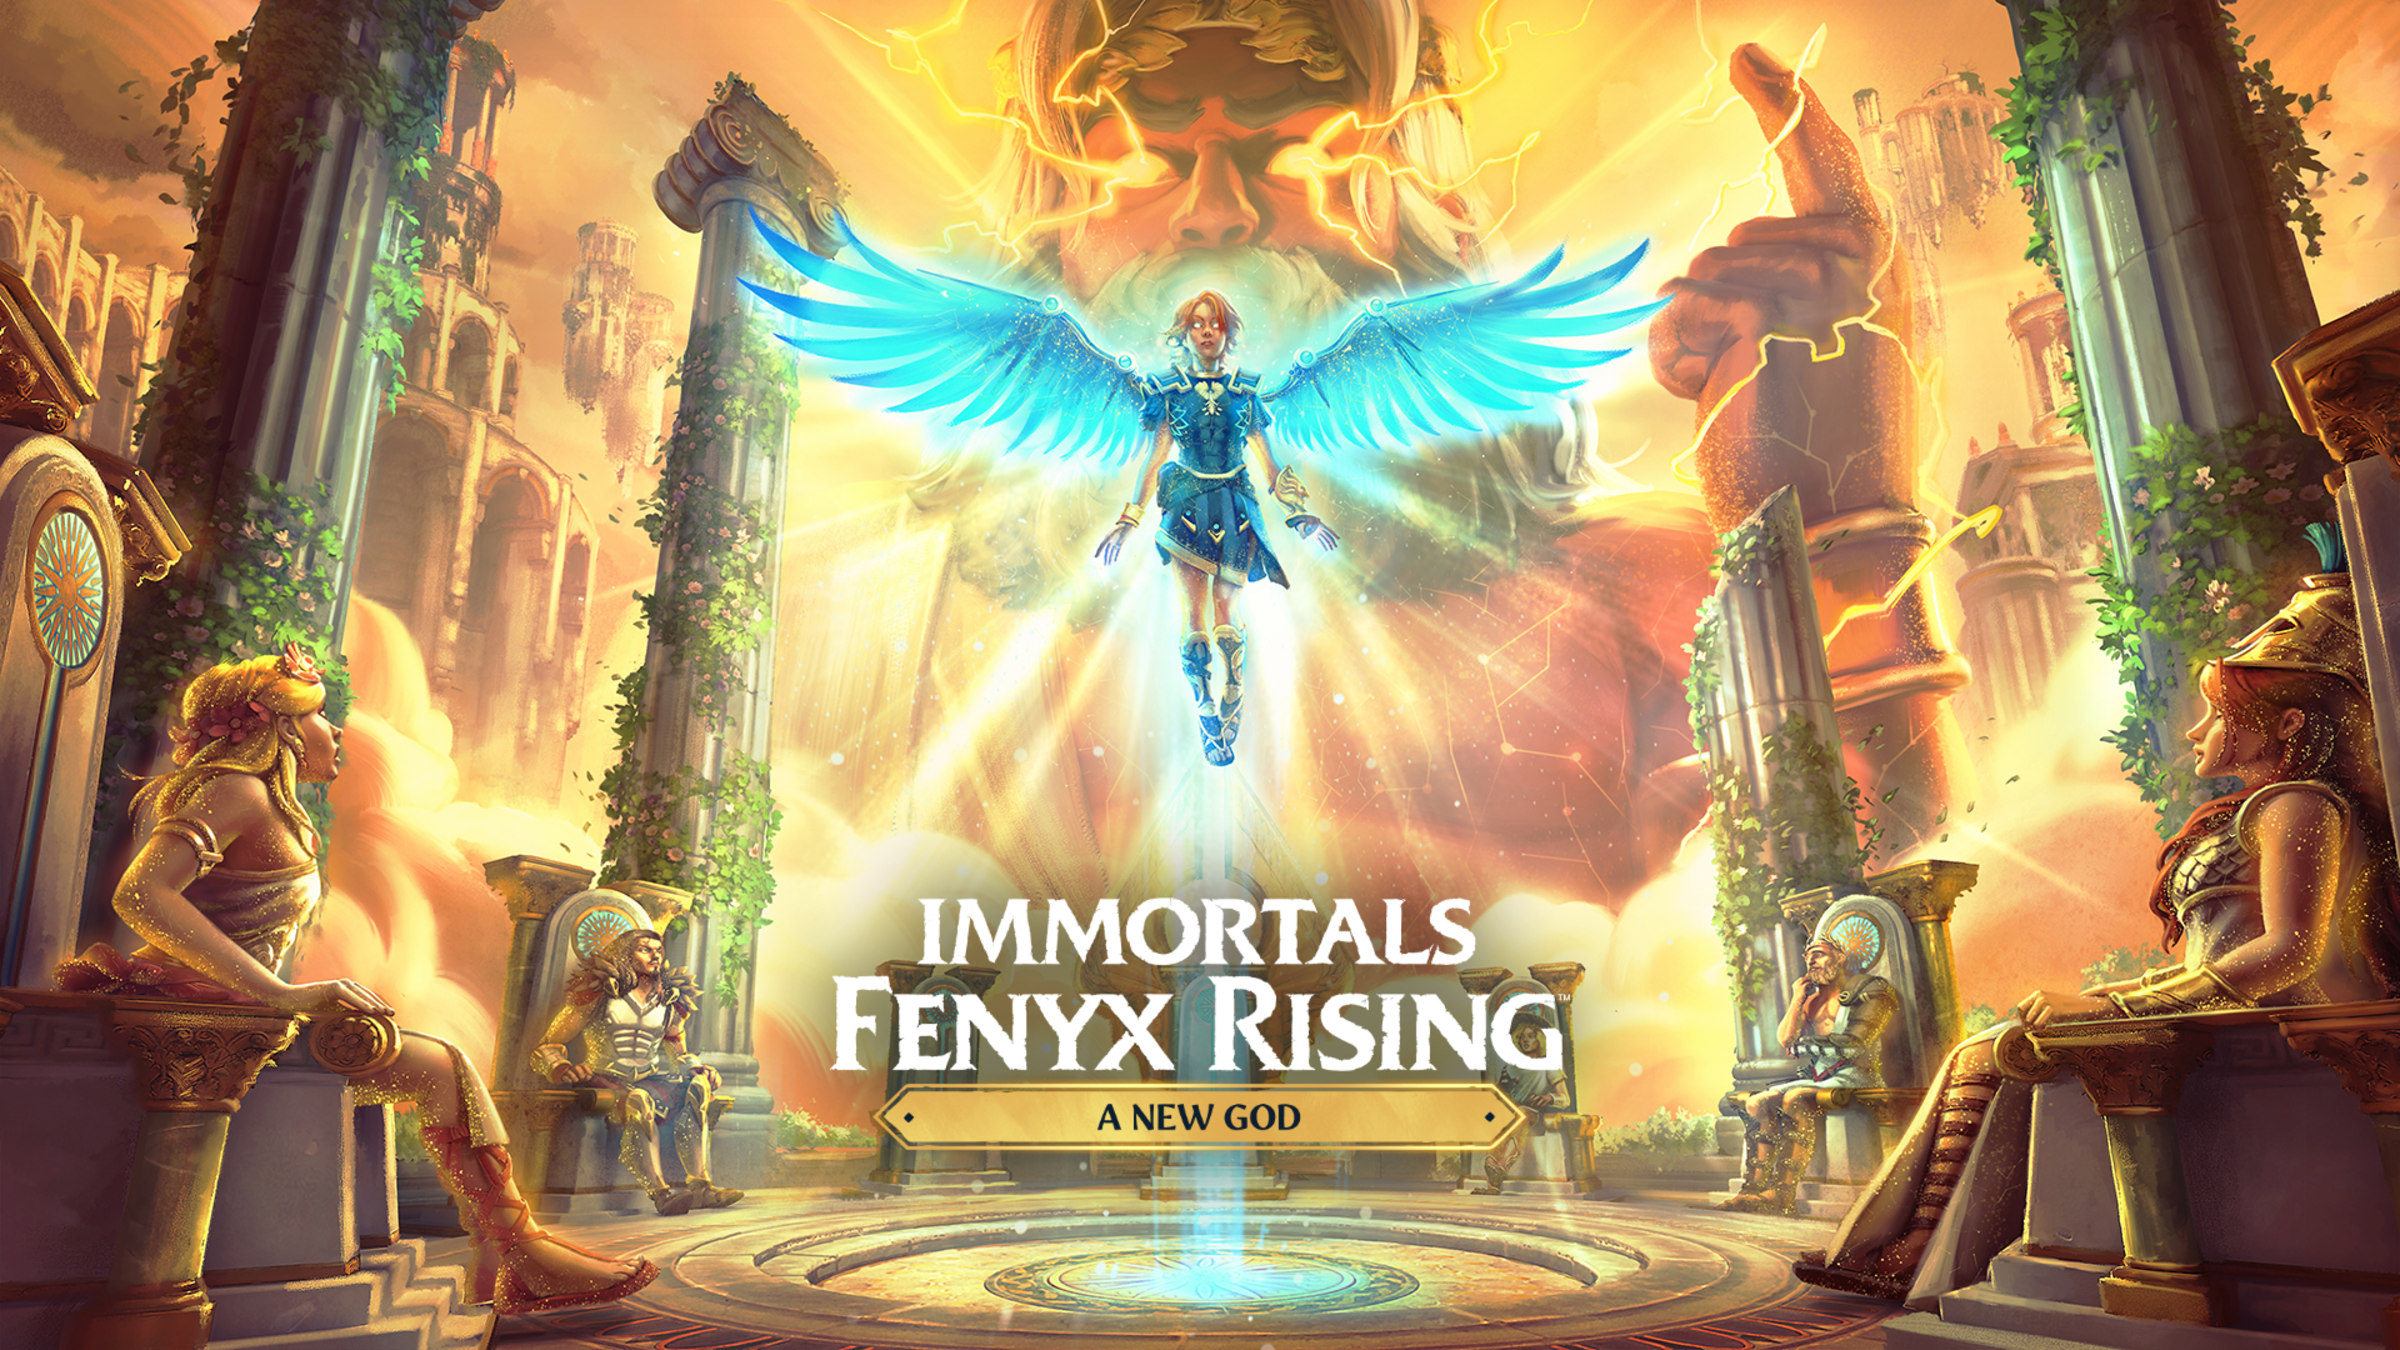 IMMORTALS A Site Nintendo god RISING Nintendo for - FENYX - New Switch Official